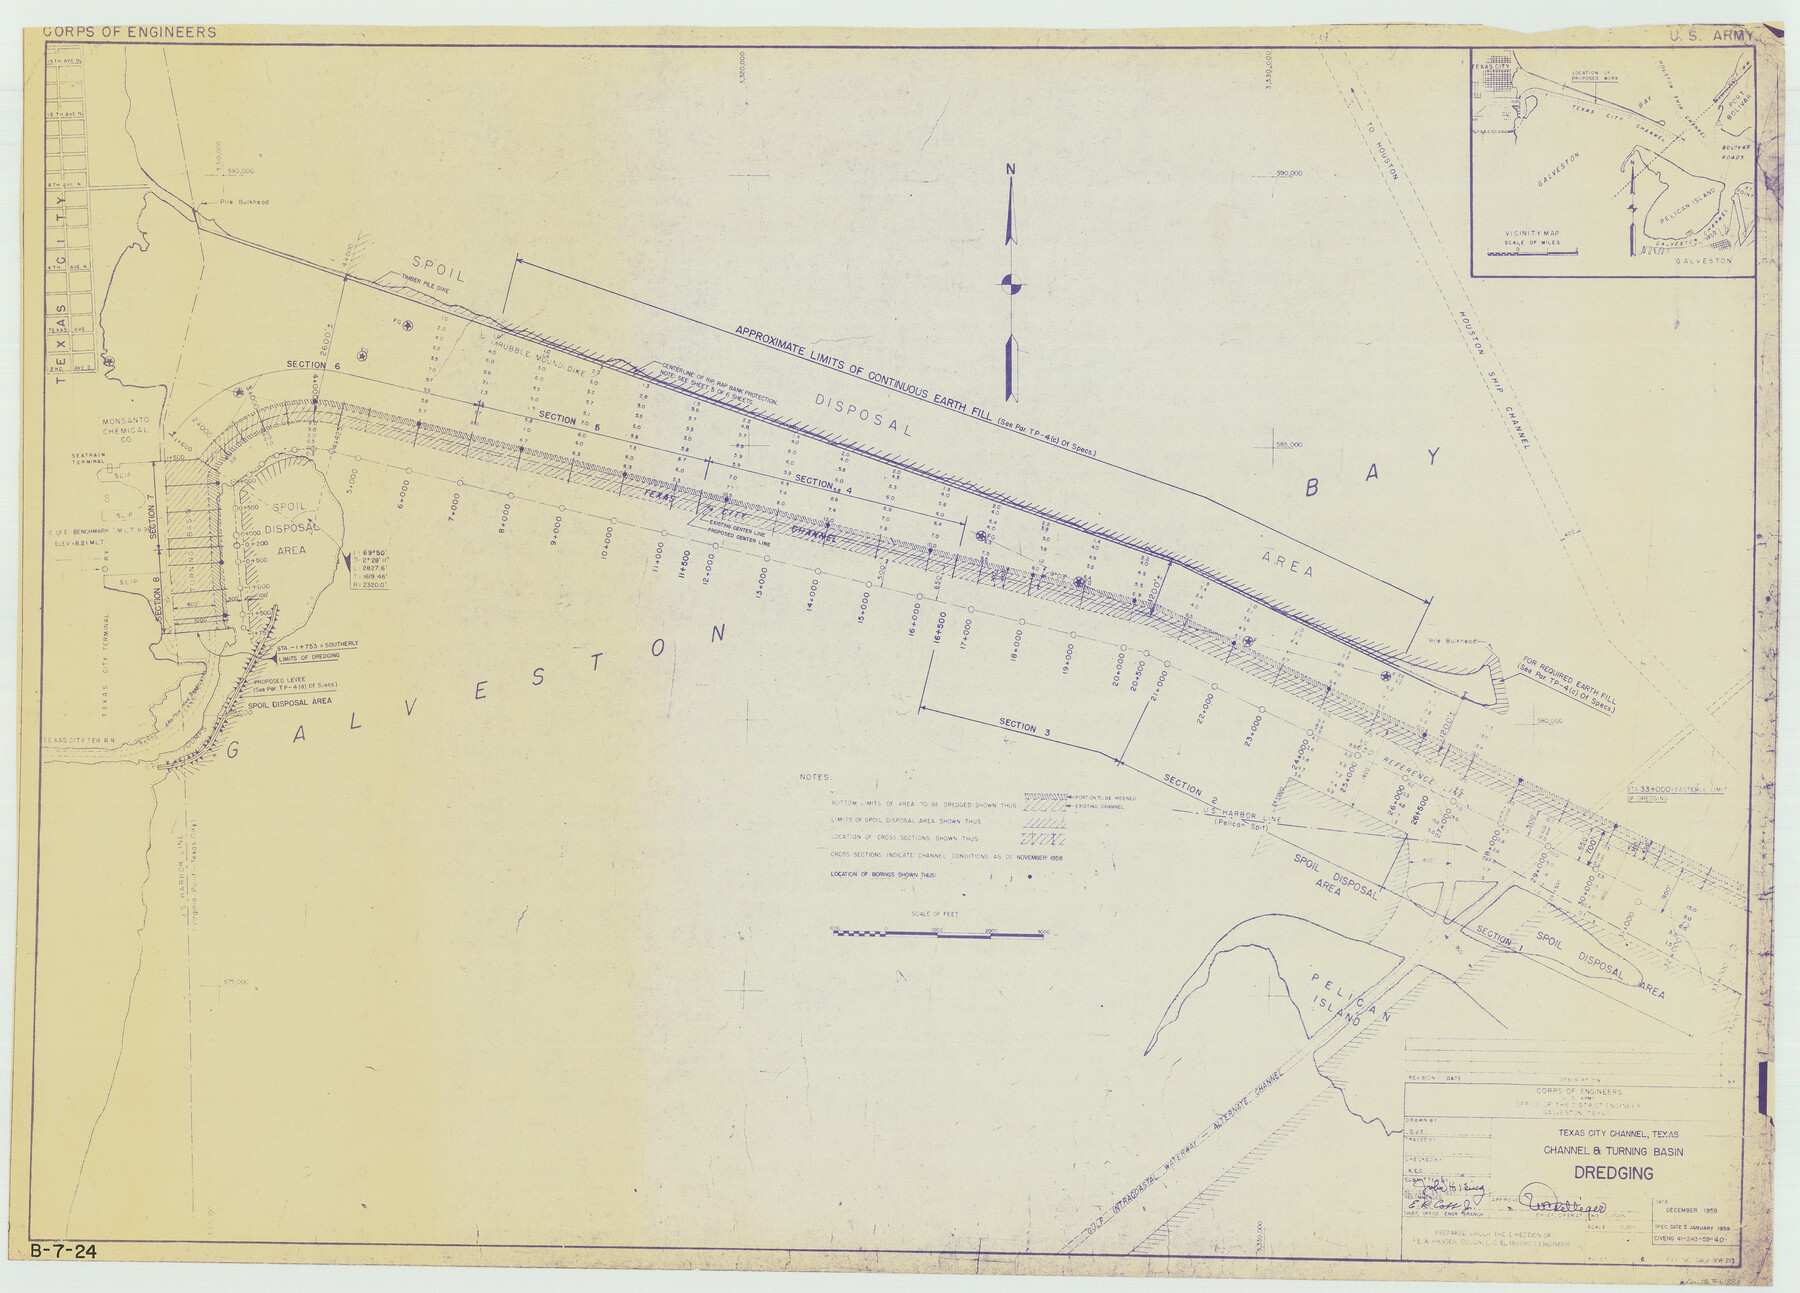 61831, Texas City Channel, Texas, Channel and Turning Basin Dredging - Sheet 1, General Map Collection